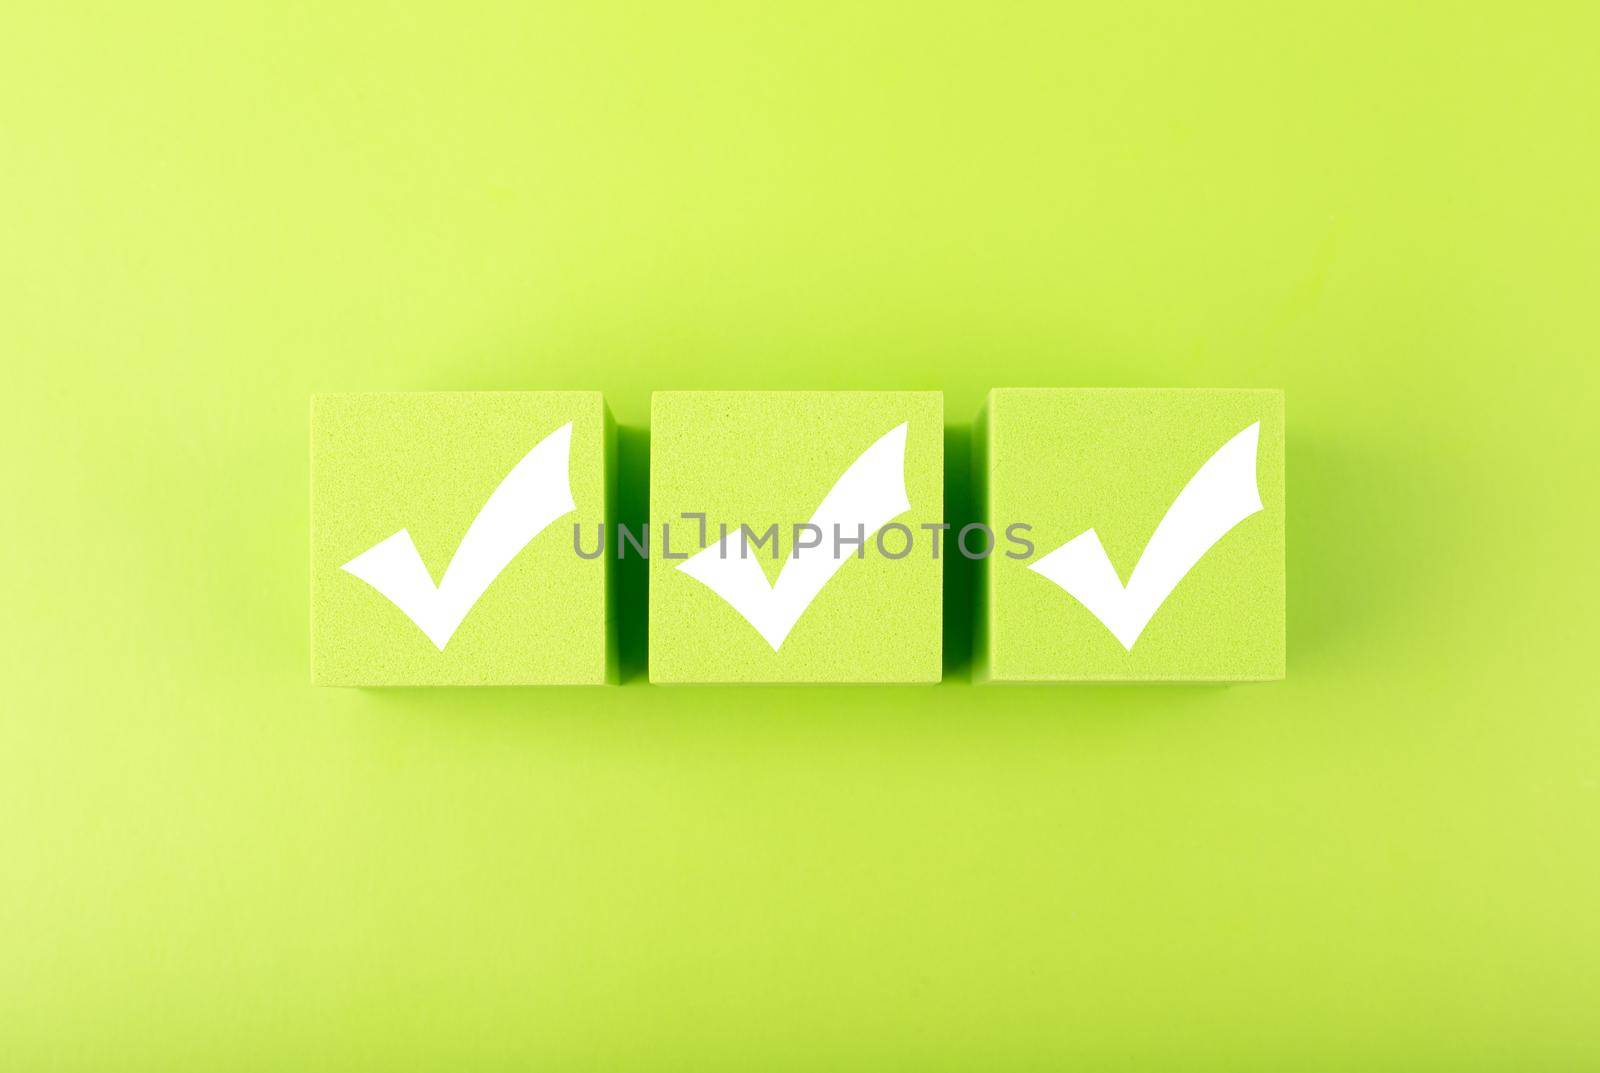 Three white checkmarks on green toy cubes in a row against bright green background. Checklist concept by Senorina_Irina